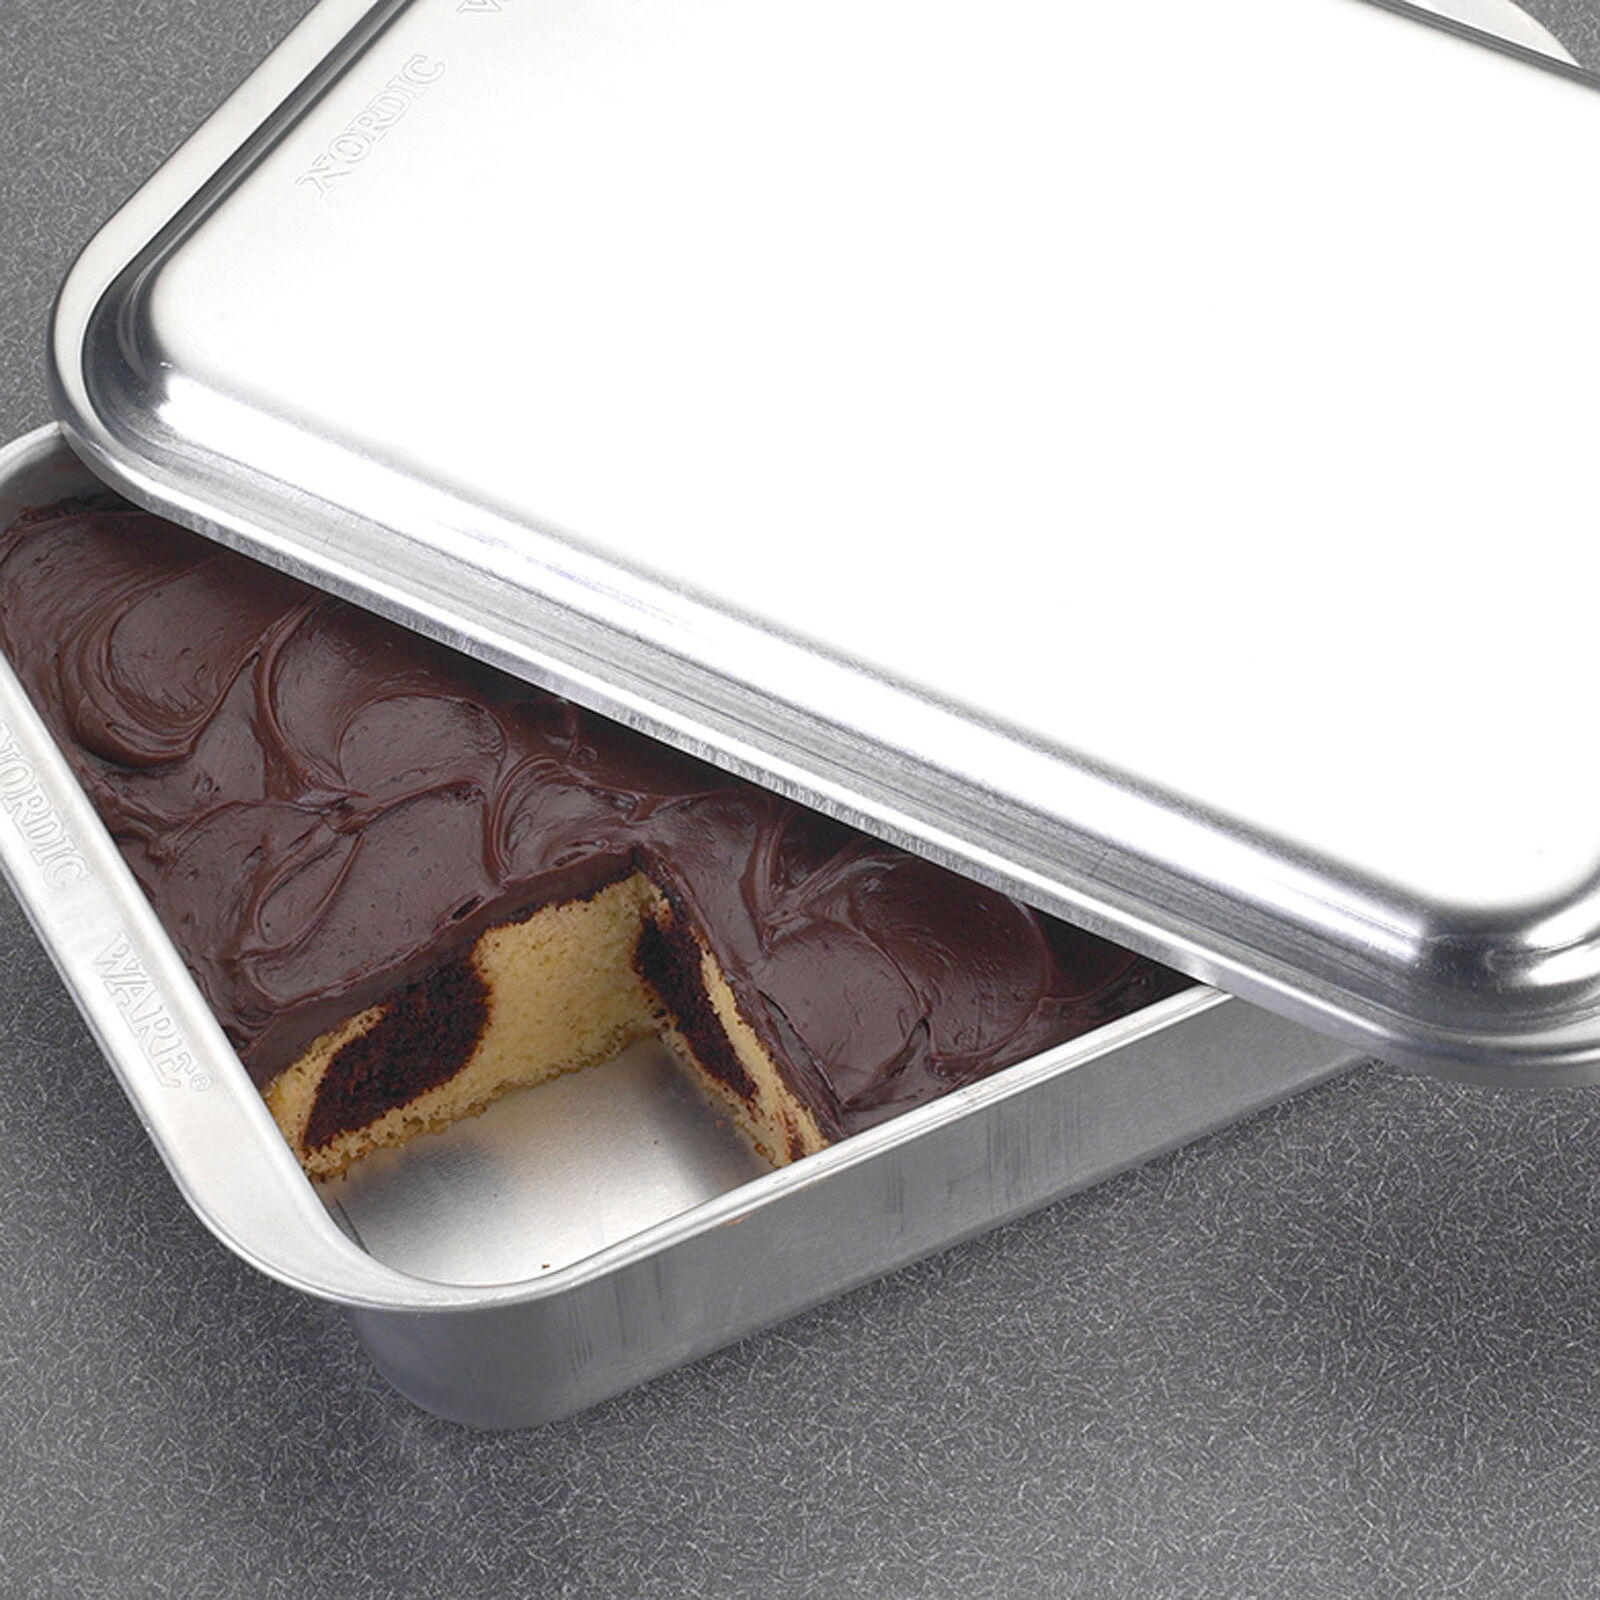 Nordic Ware 9 x 13 baking pan with lid made of natural aluminum for durability